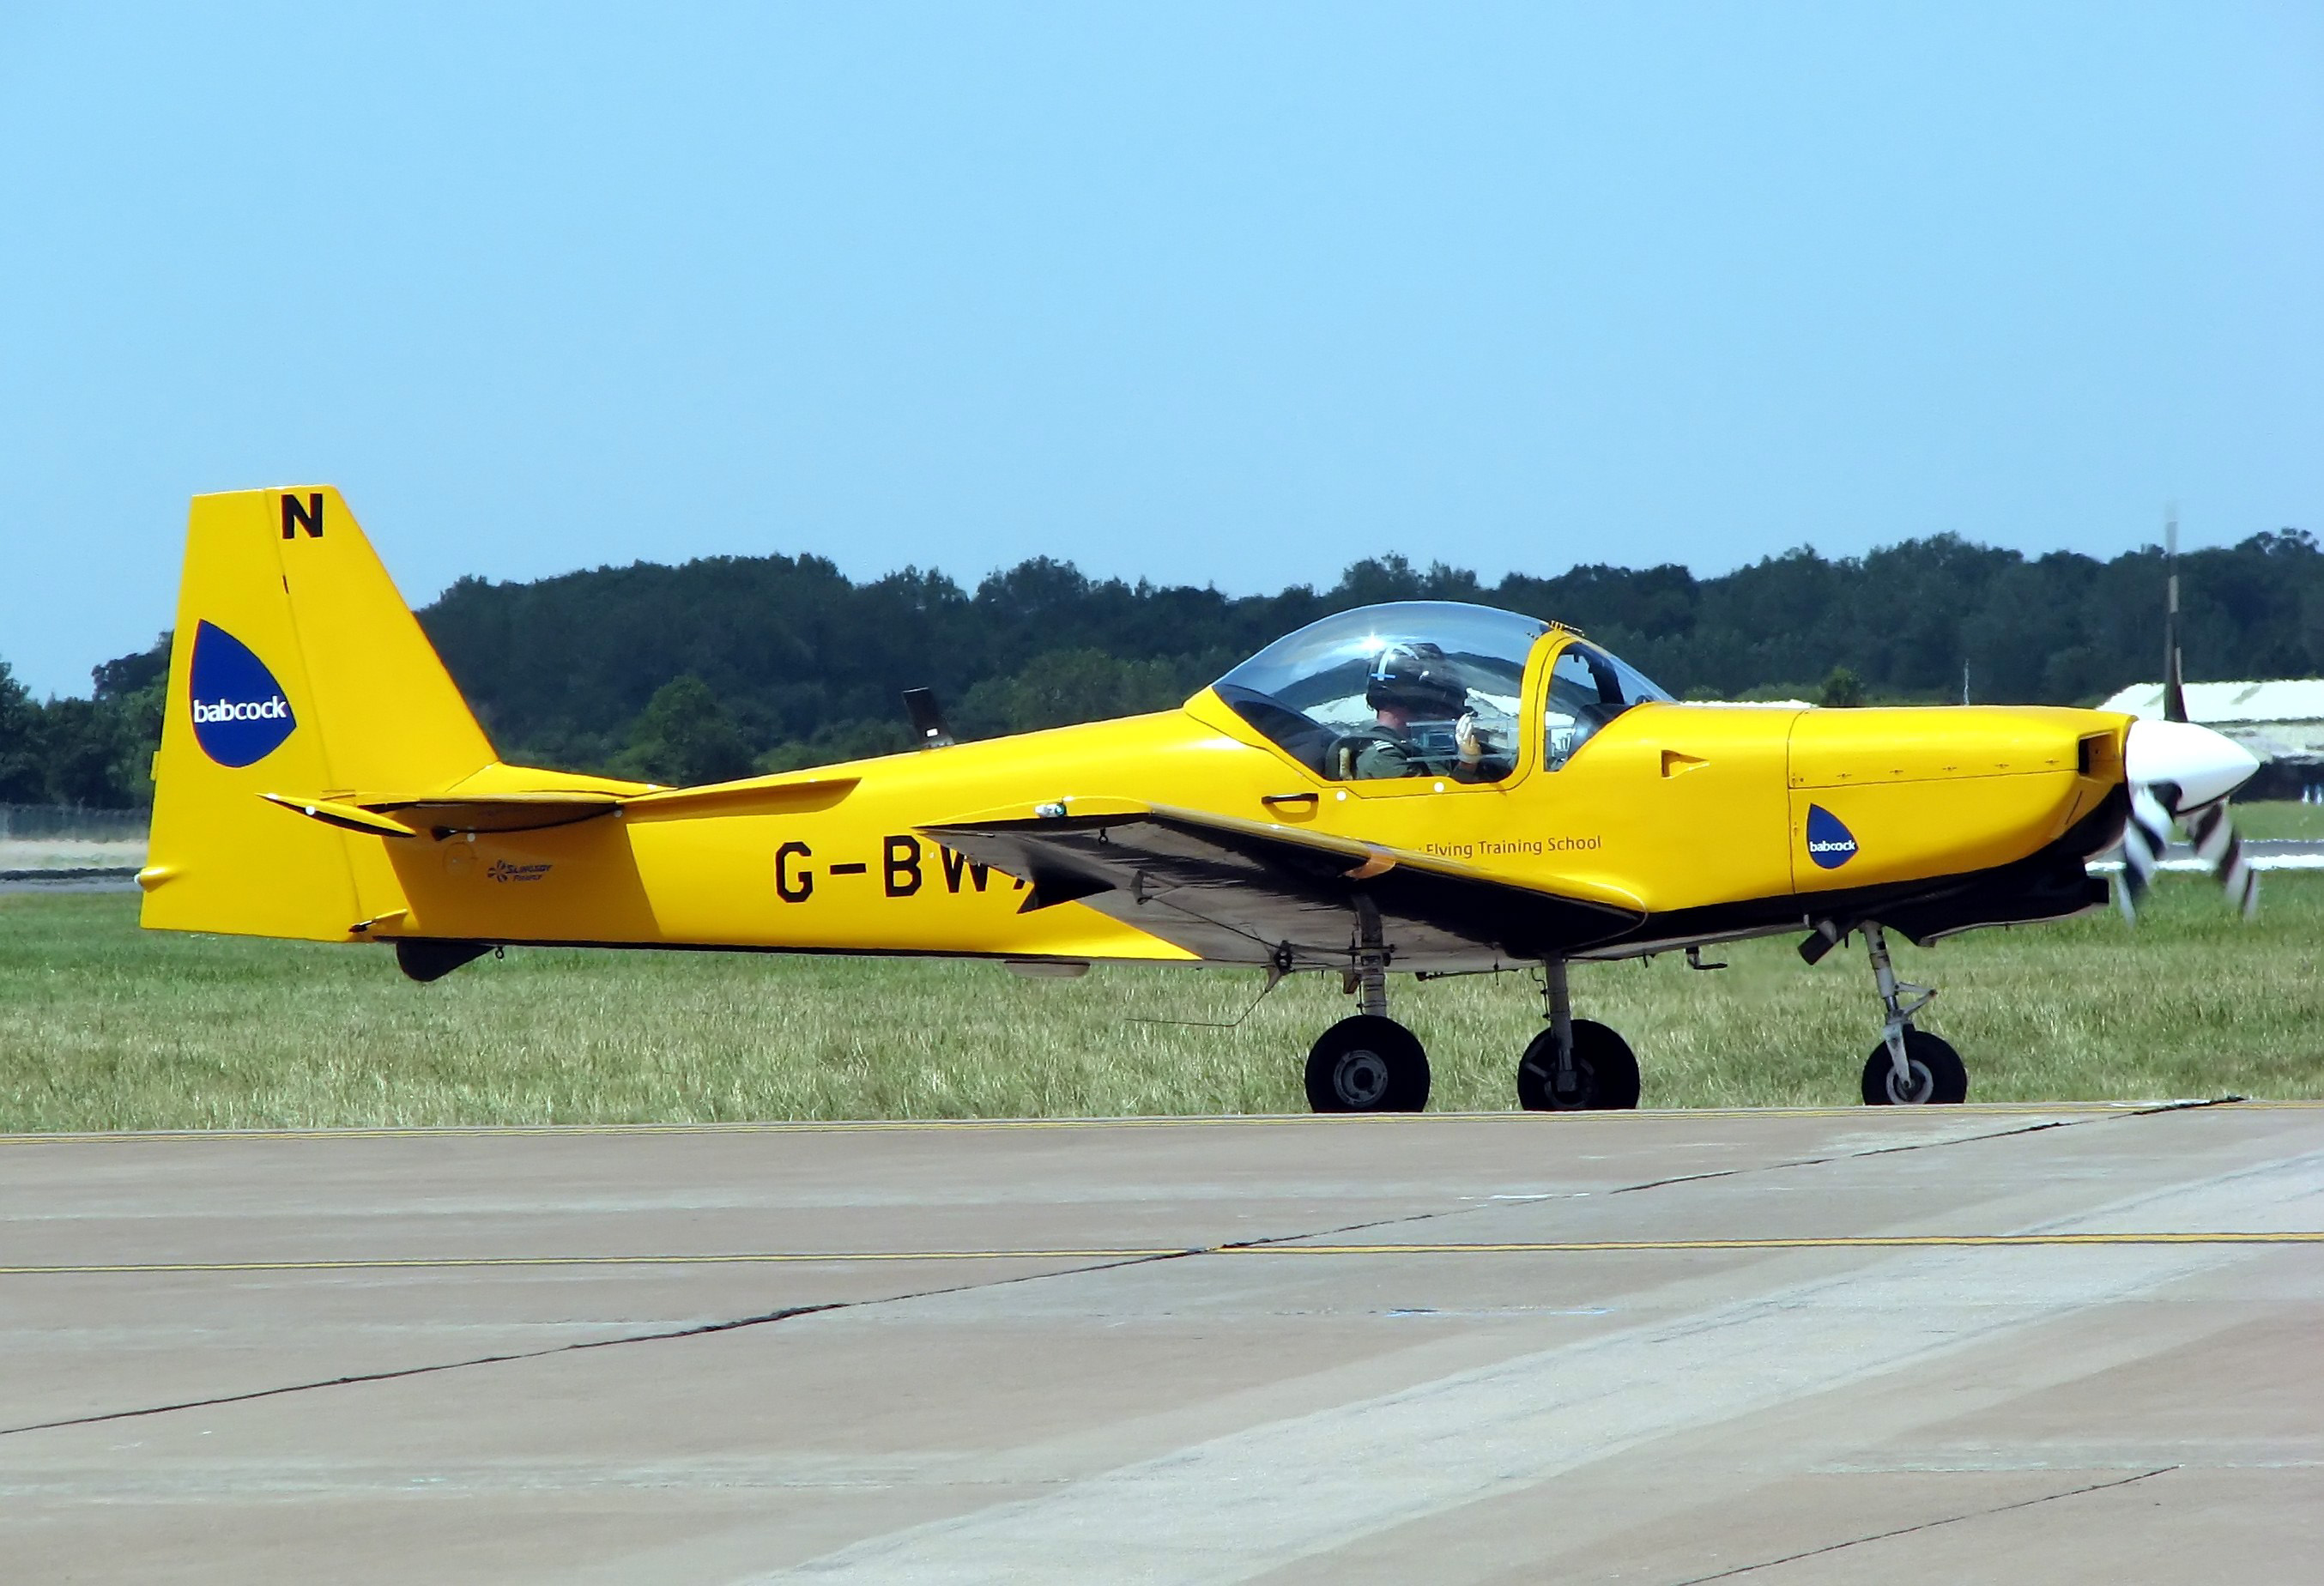 Slingsby T-67 Firefly next